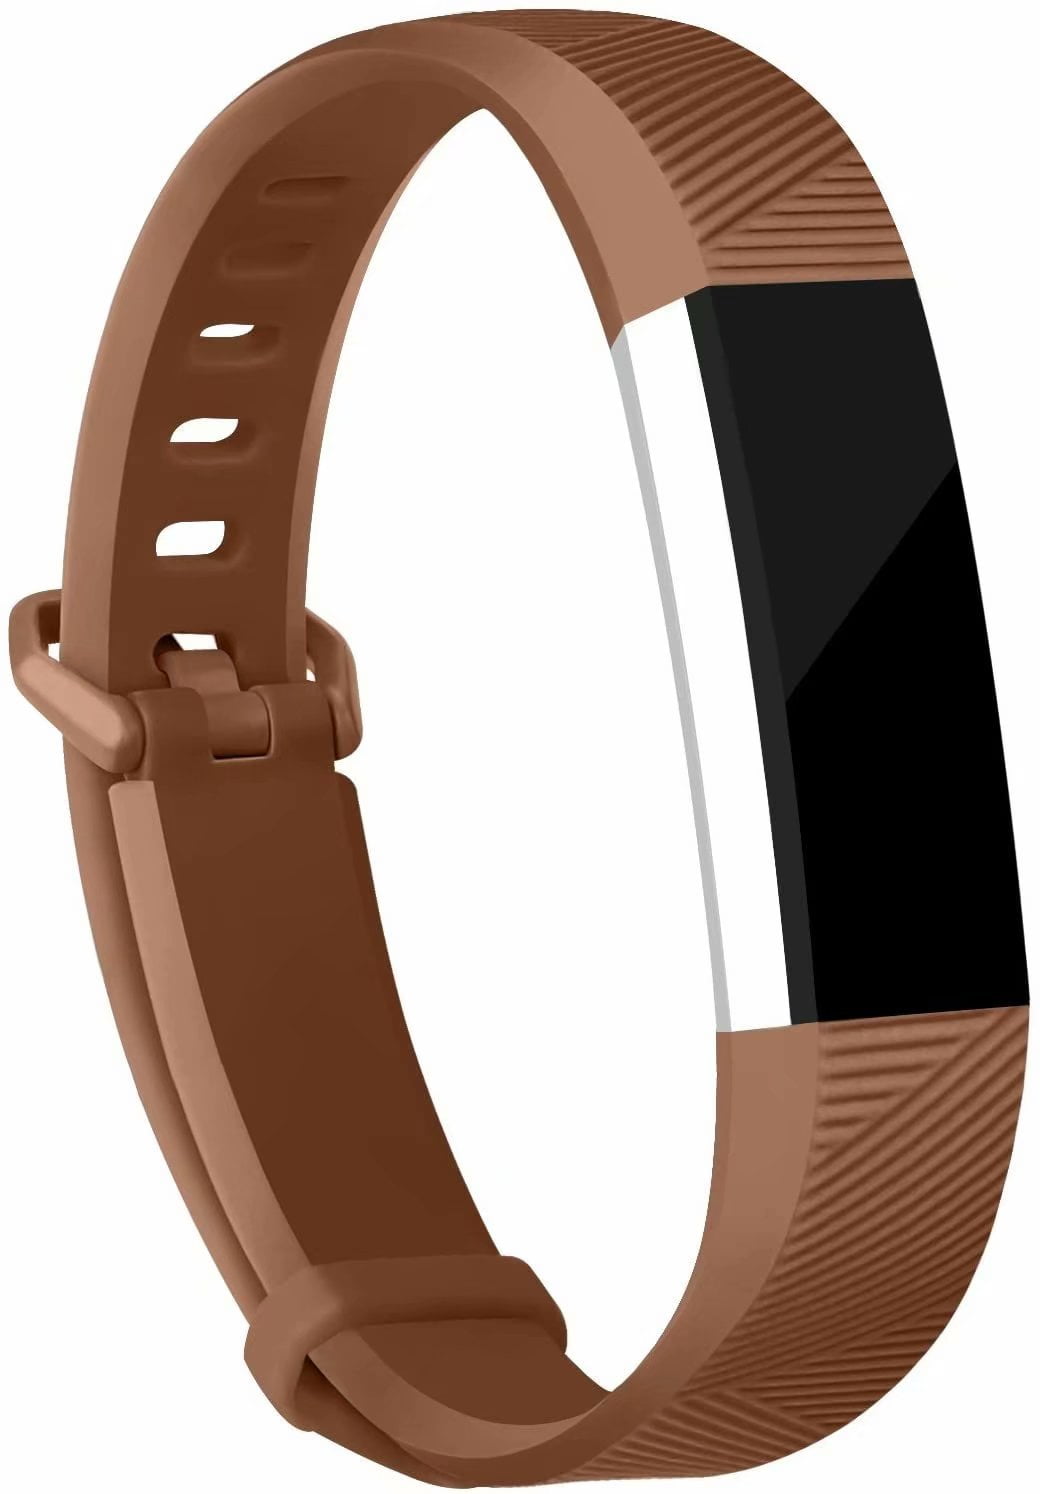 BLACK WEB REPLACEMENT BAND WITH STEEL BUCKLE  FOR  FITBIT ALTA BROWN 